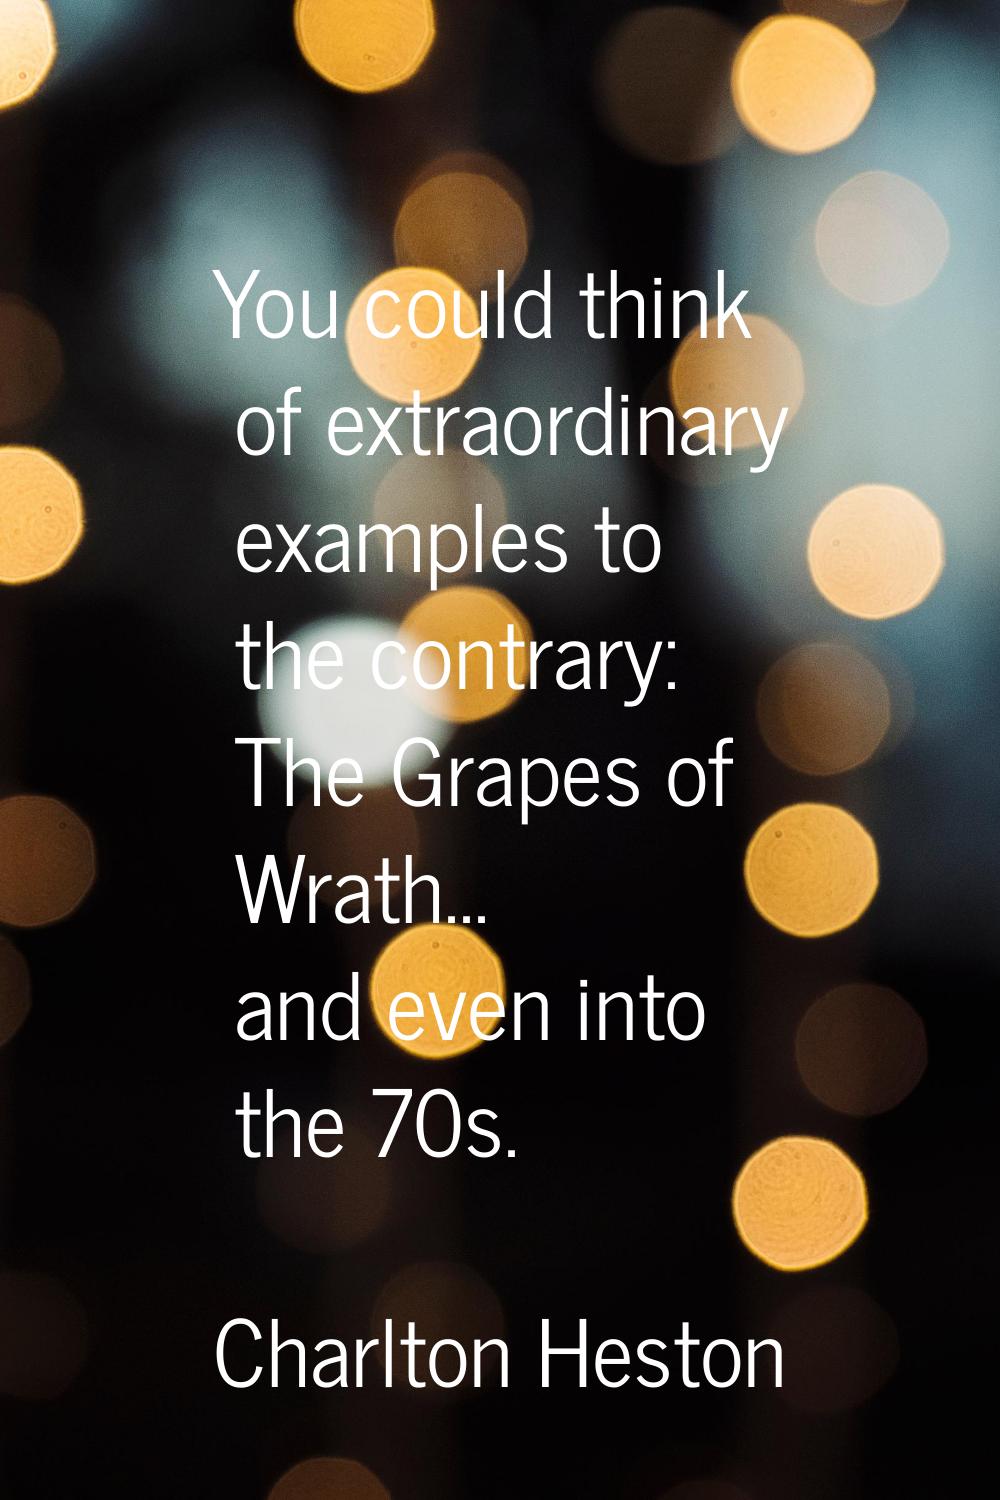 You could think of extraordinary examples to the contrary: The Grapes of Wrath... and even into the